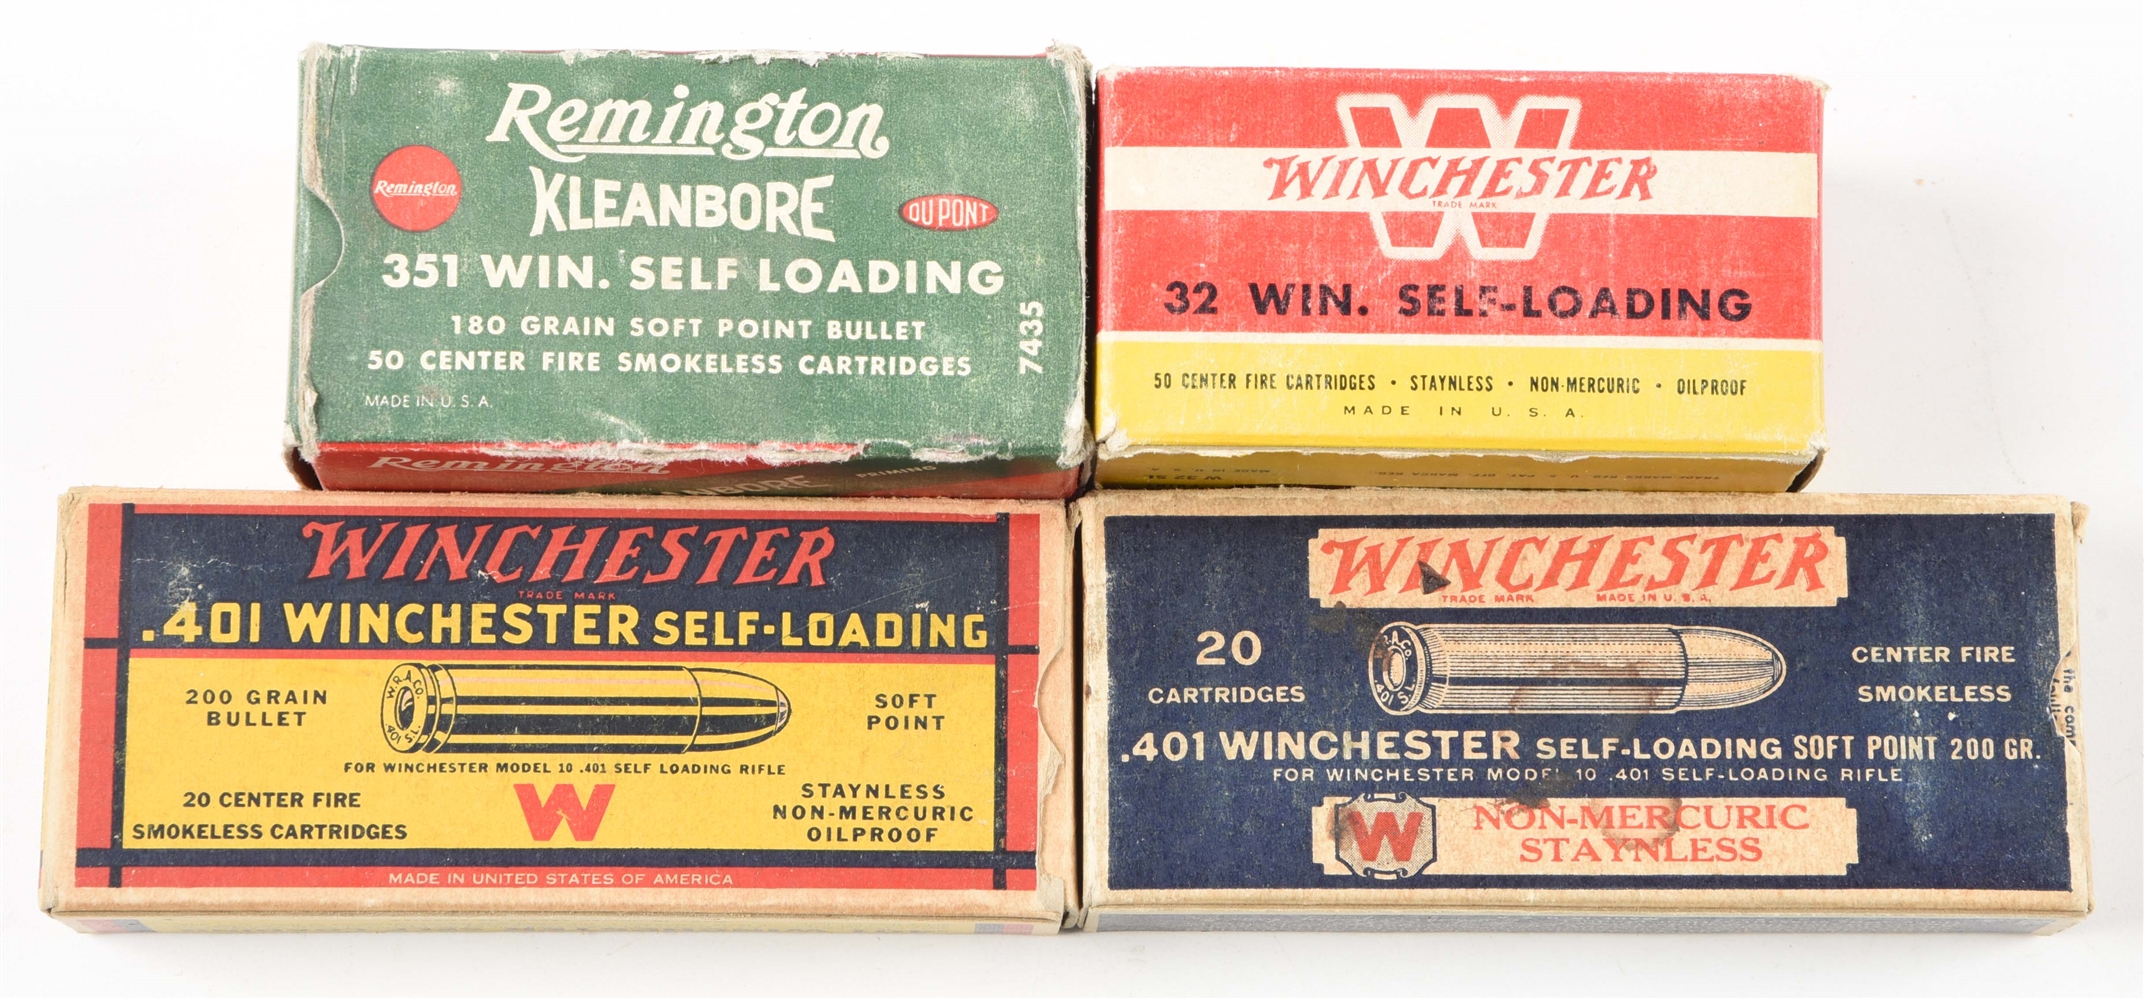 LOT OF 4: VINTAGE BOXES OF WINCHESTER SELF LOADING RIFLE AMMUNITION.